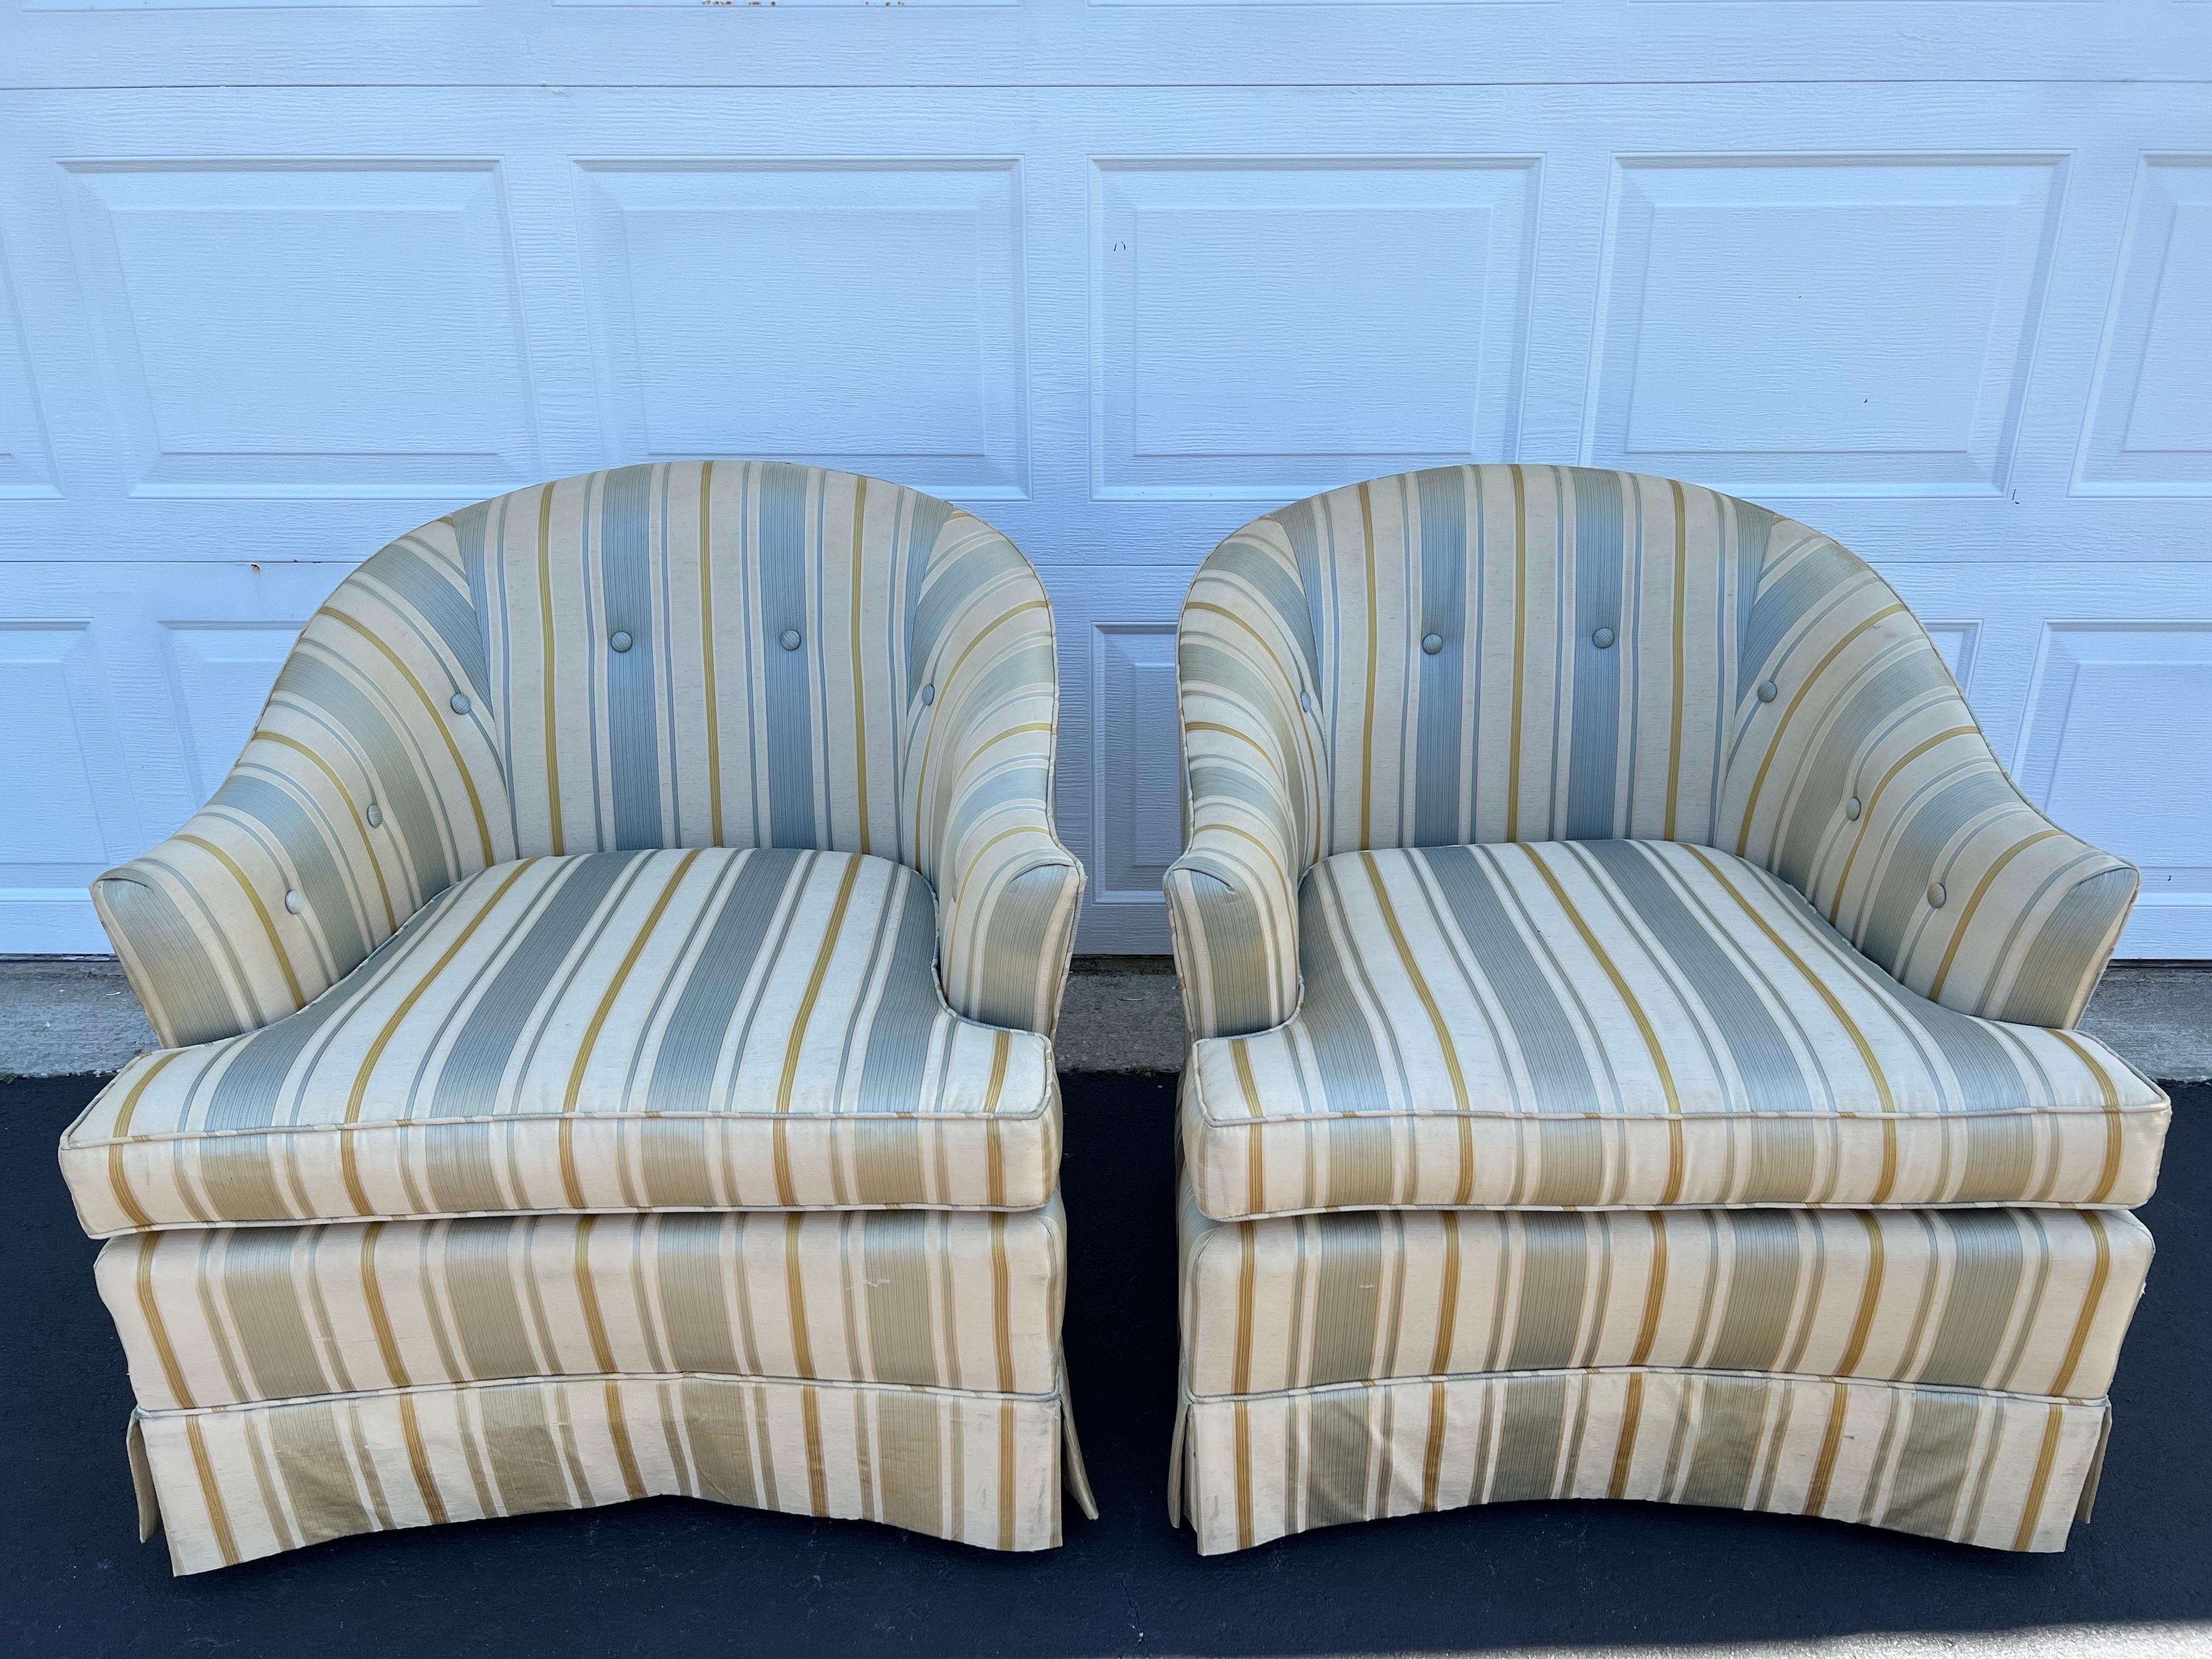 Pair of silk club chairs by Drexel Heritage. Classic tailored cube shape with buttons.
Could use a re-upholstery job , some tears in the silk, but excellent bones. No structural issues at all. These beauties have four tapered solid wooden legs. 